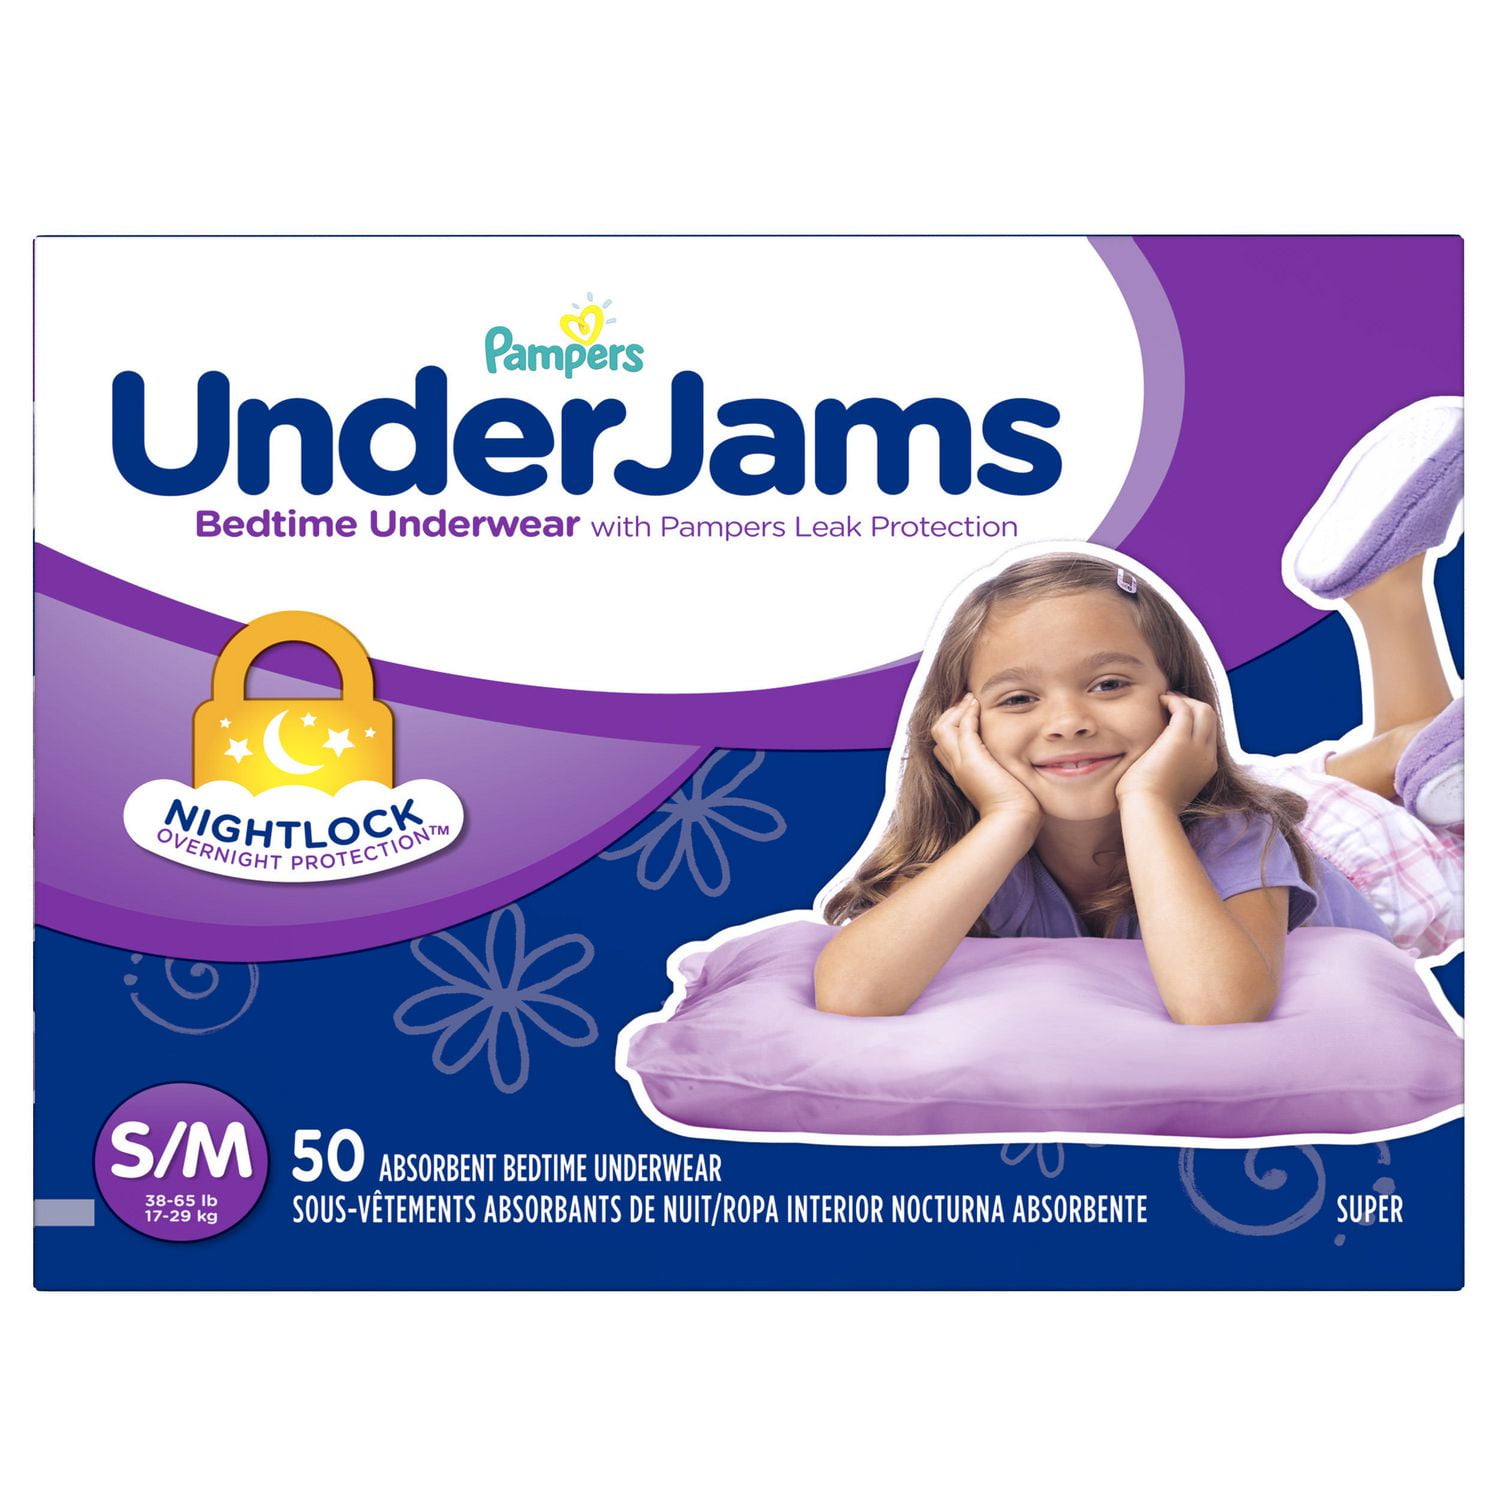 Pampers Ninjamas Nighttime Bedwetting Underwear Boys Size S/M (38-65 lbs)  88 Count (Packaging & Prints May Vary) : : Baby